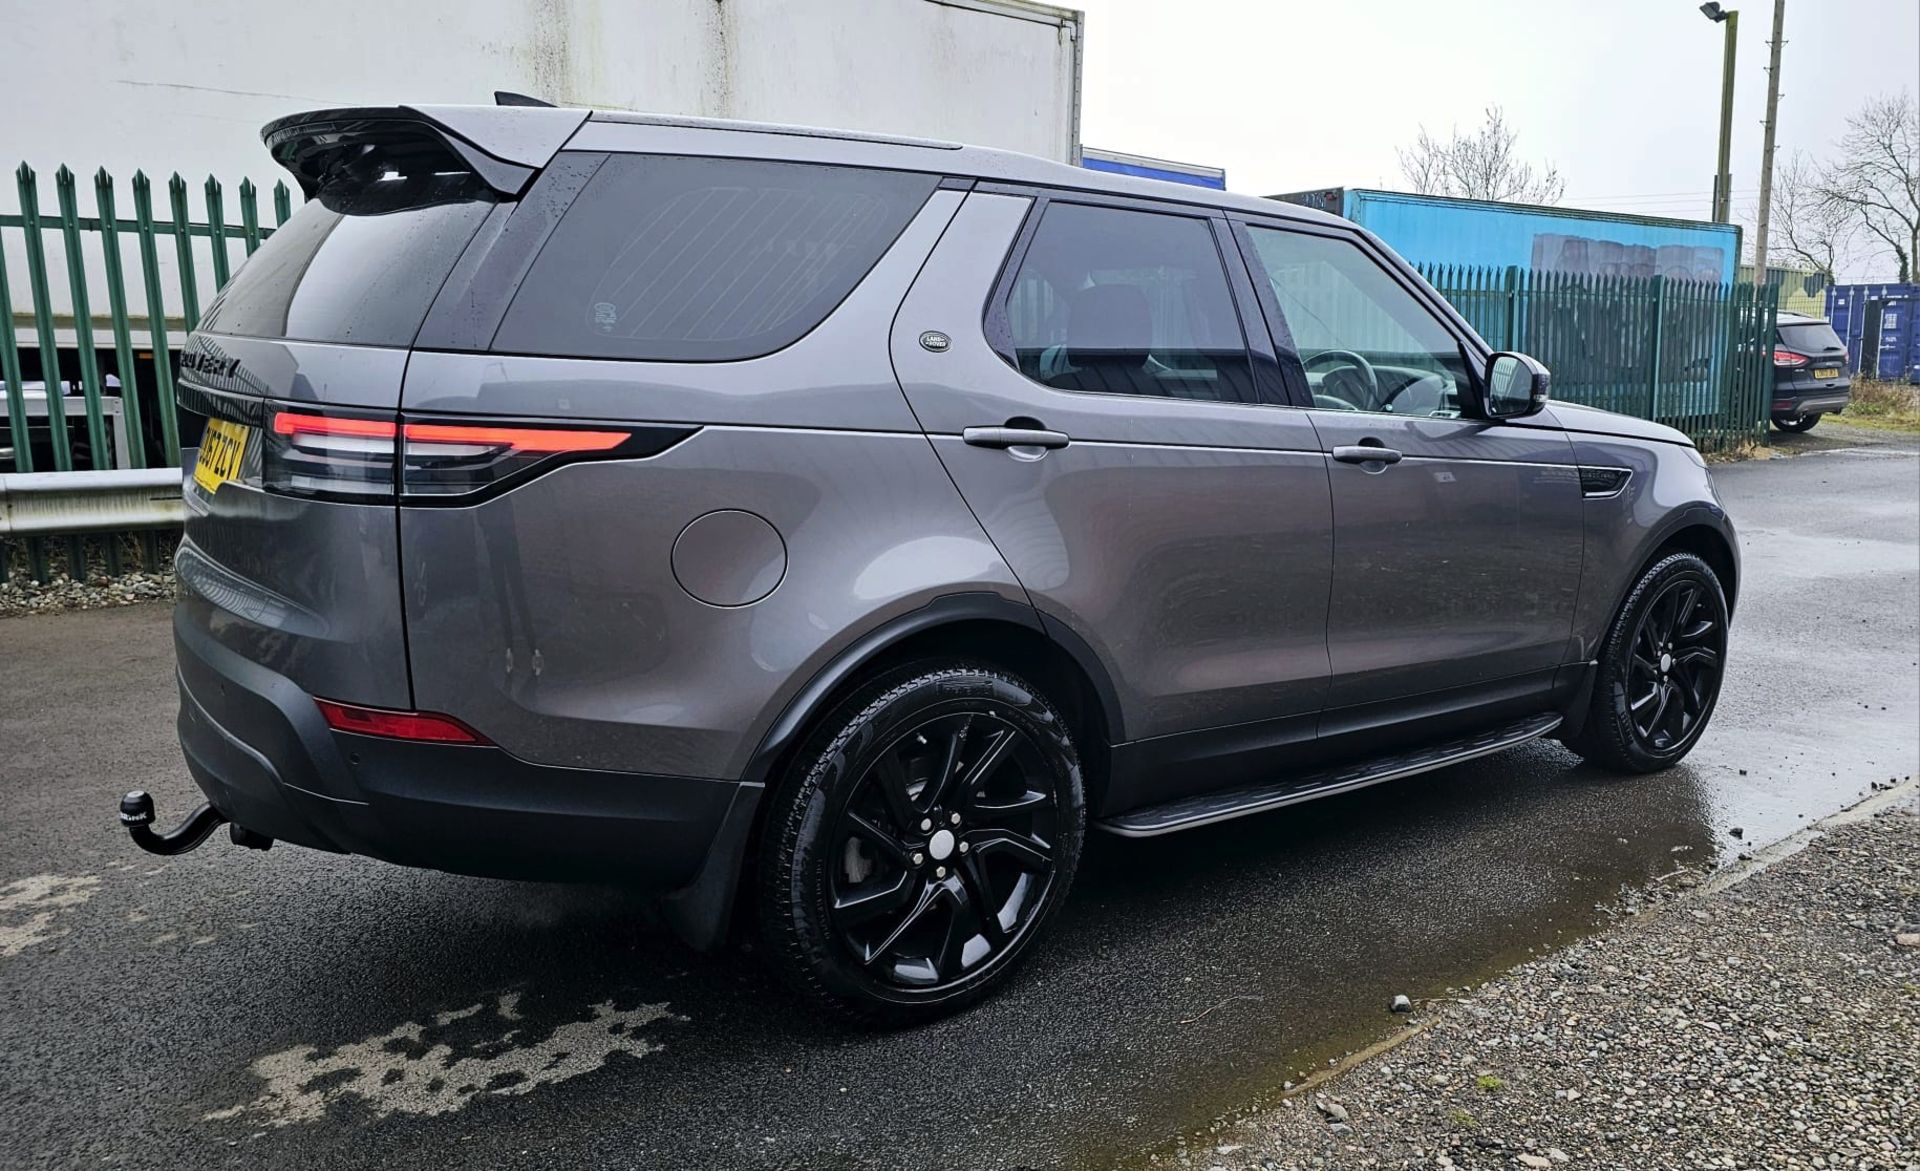 Land Rover Discovery 5 - (New Model) Diesel Auto - 2018 Model - Black Pack Edition - Sat Nav - Look - Image 16 of 45